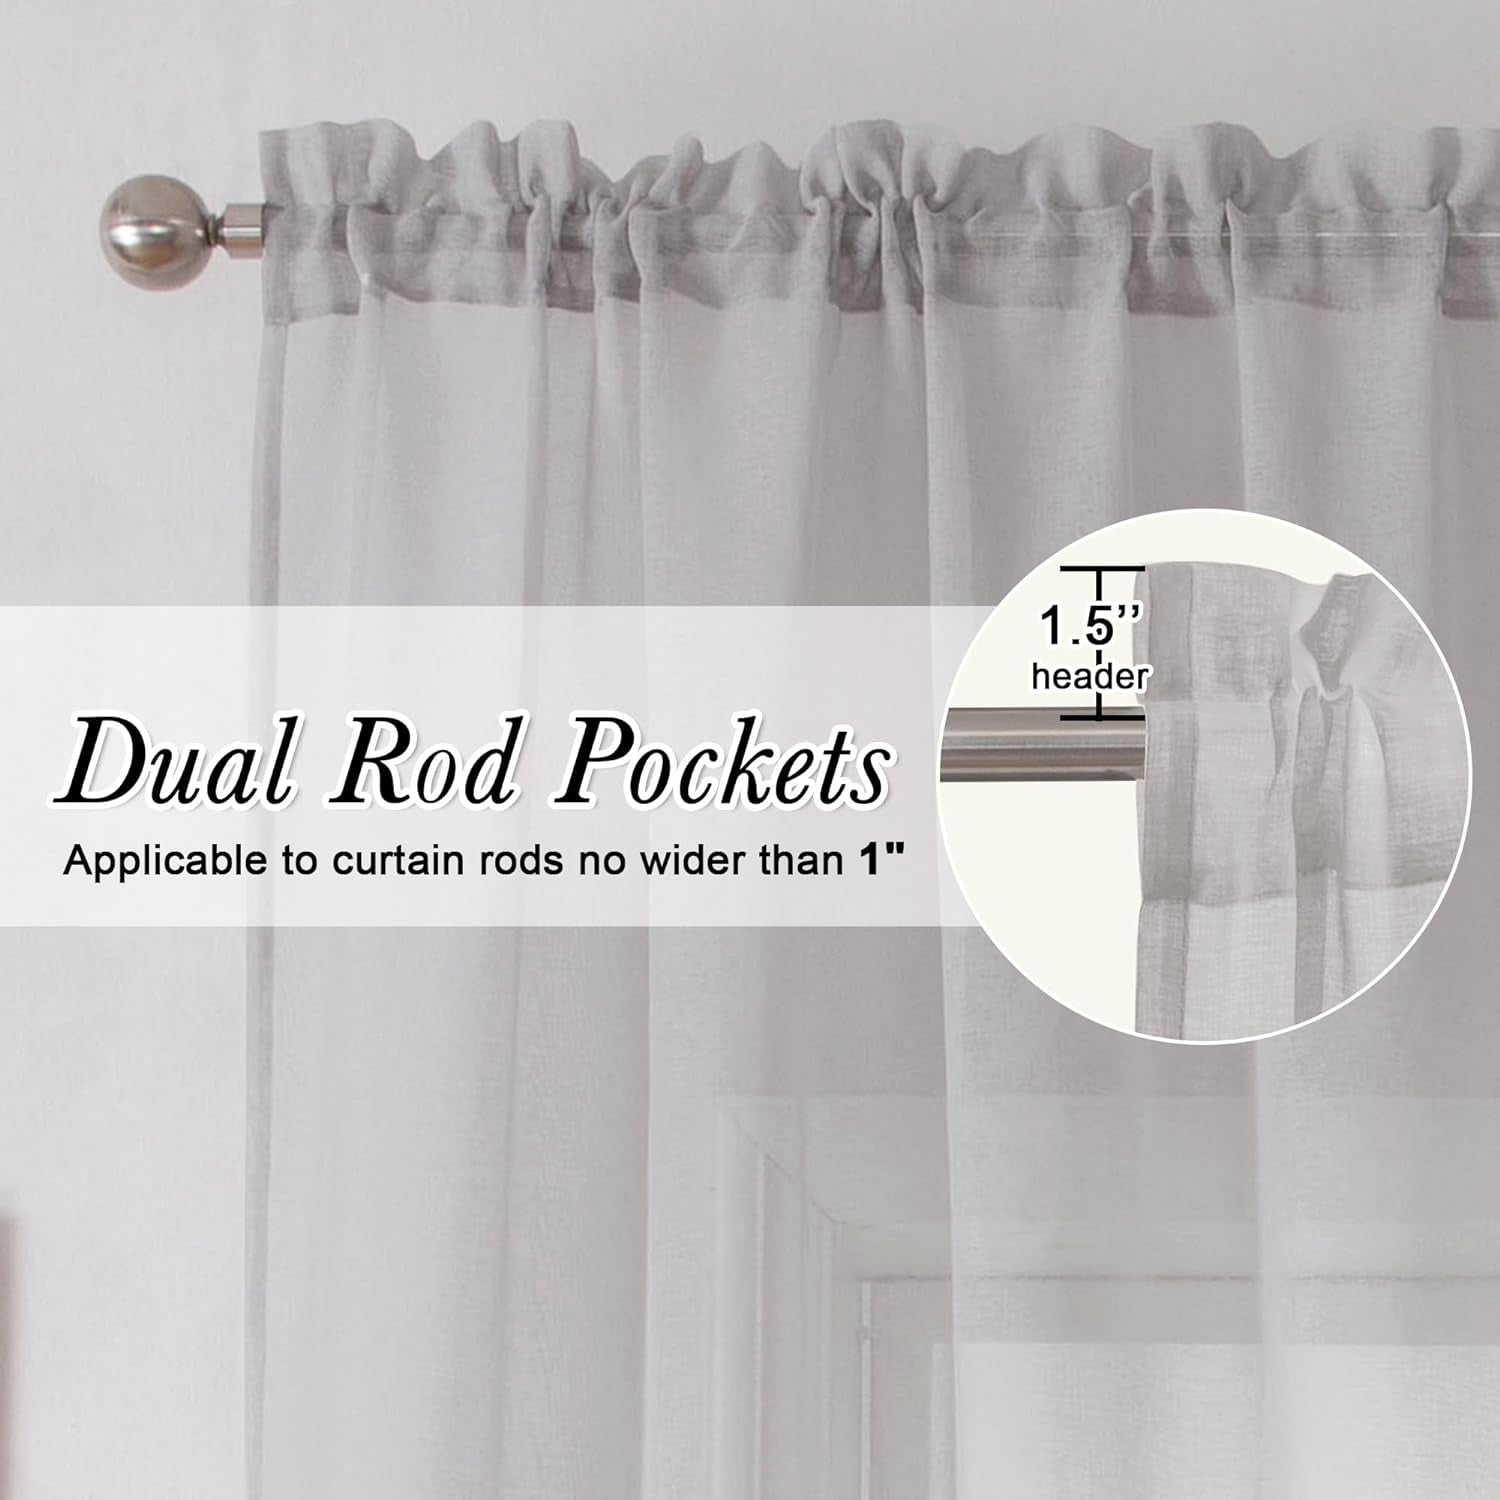 Lecloud Doris Faux Linen Sheer Grey Valance Curtains 14 Inches Length, Cafe Kitchen Bedroom Living Room Gauzy Silver Grey Curtain for Small Window, Slub Light Gray Valance Dual Rod Pockets 60X14 Inch  Lecloud   